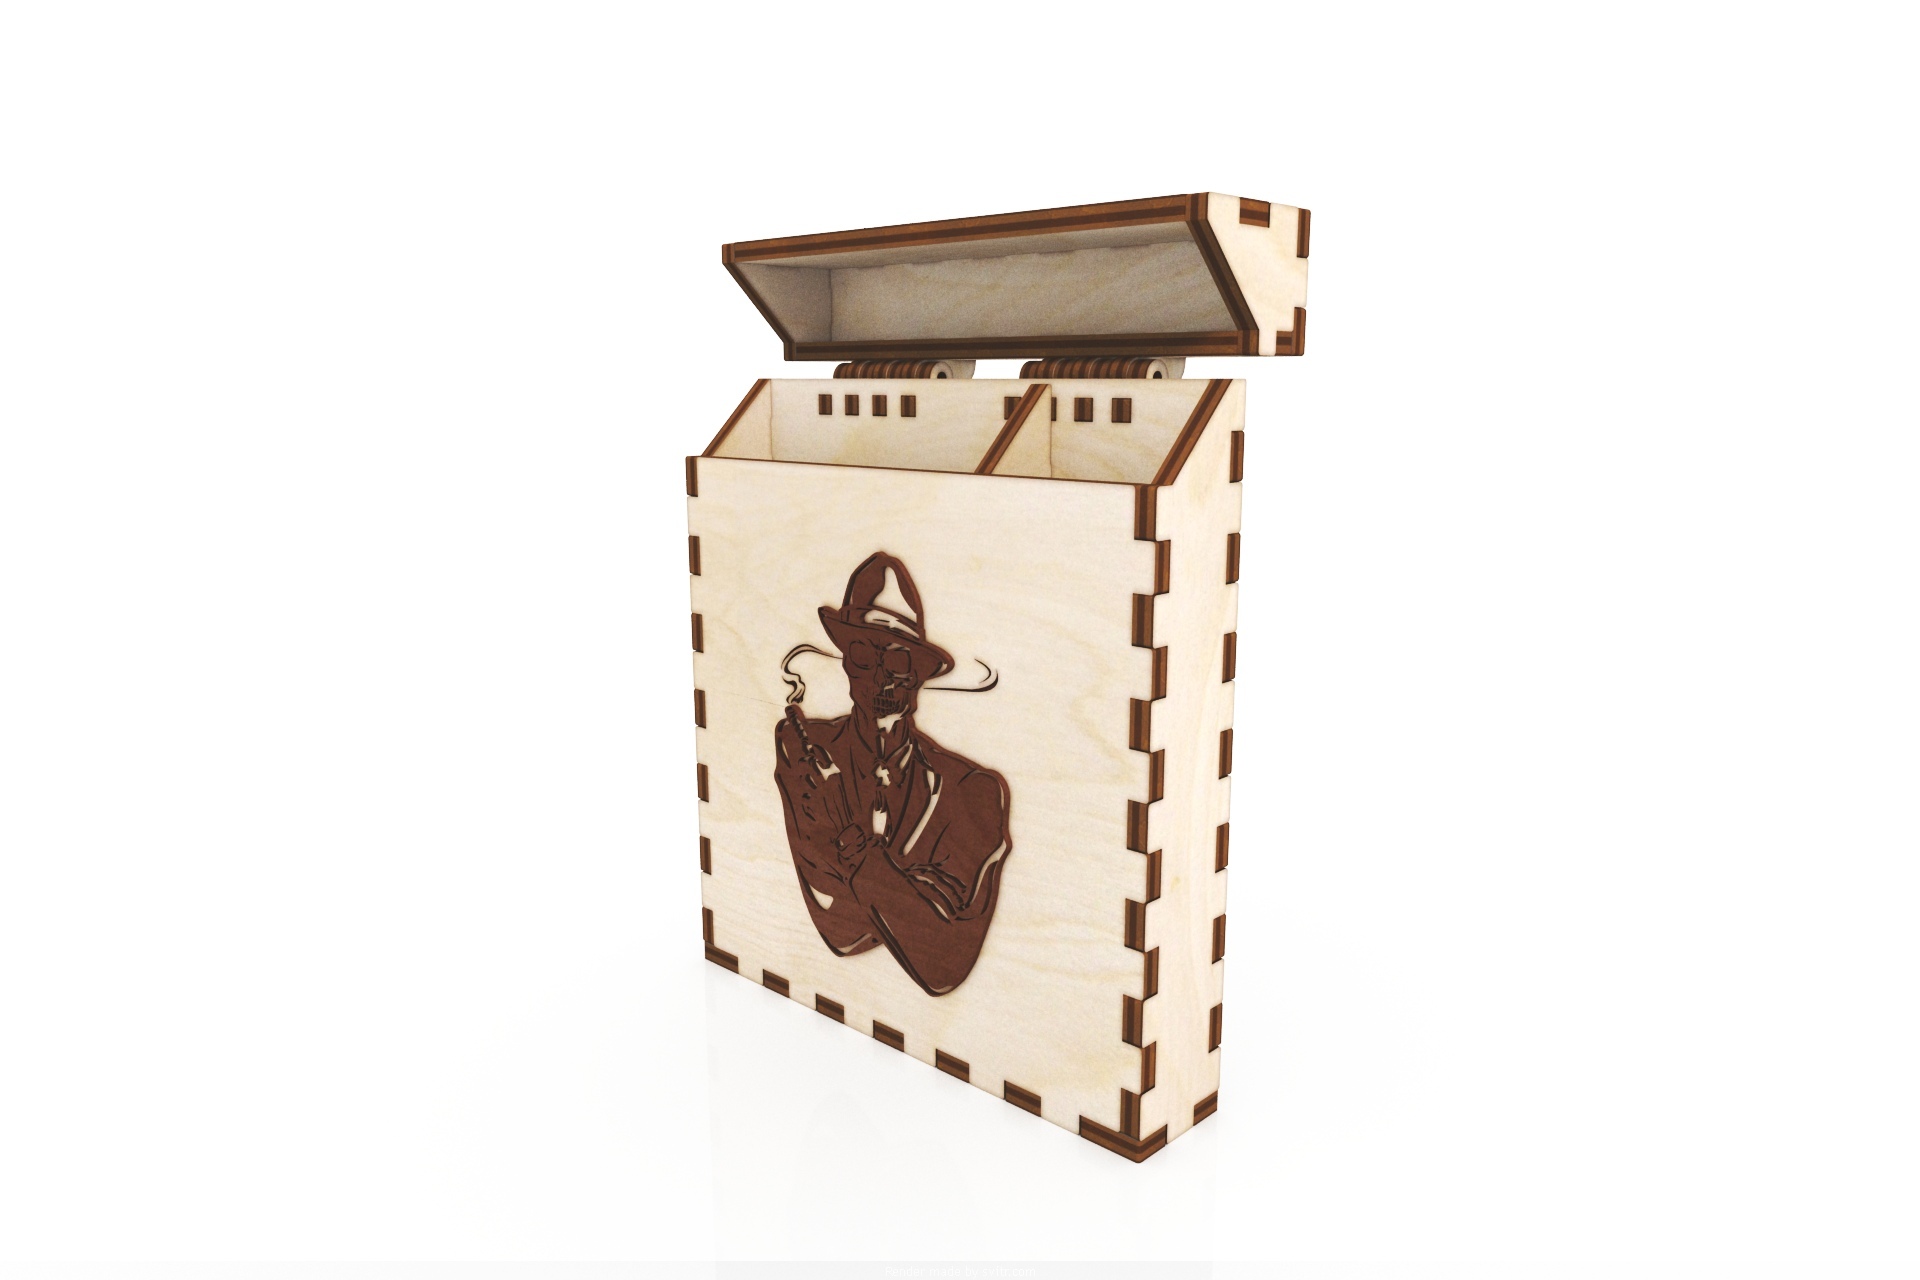 Laser Cut Wooden Cigarette Box 100mm Free Vector Cdr 3axis Co